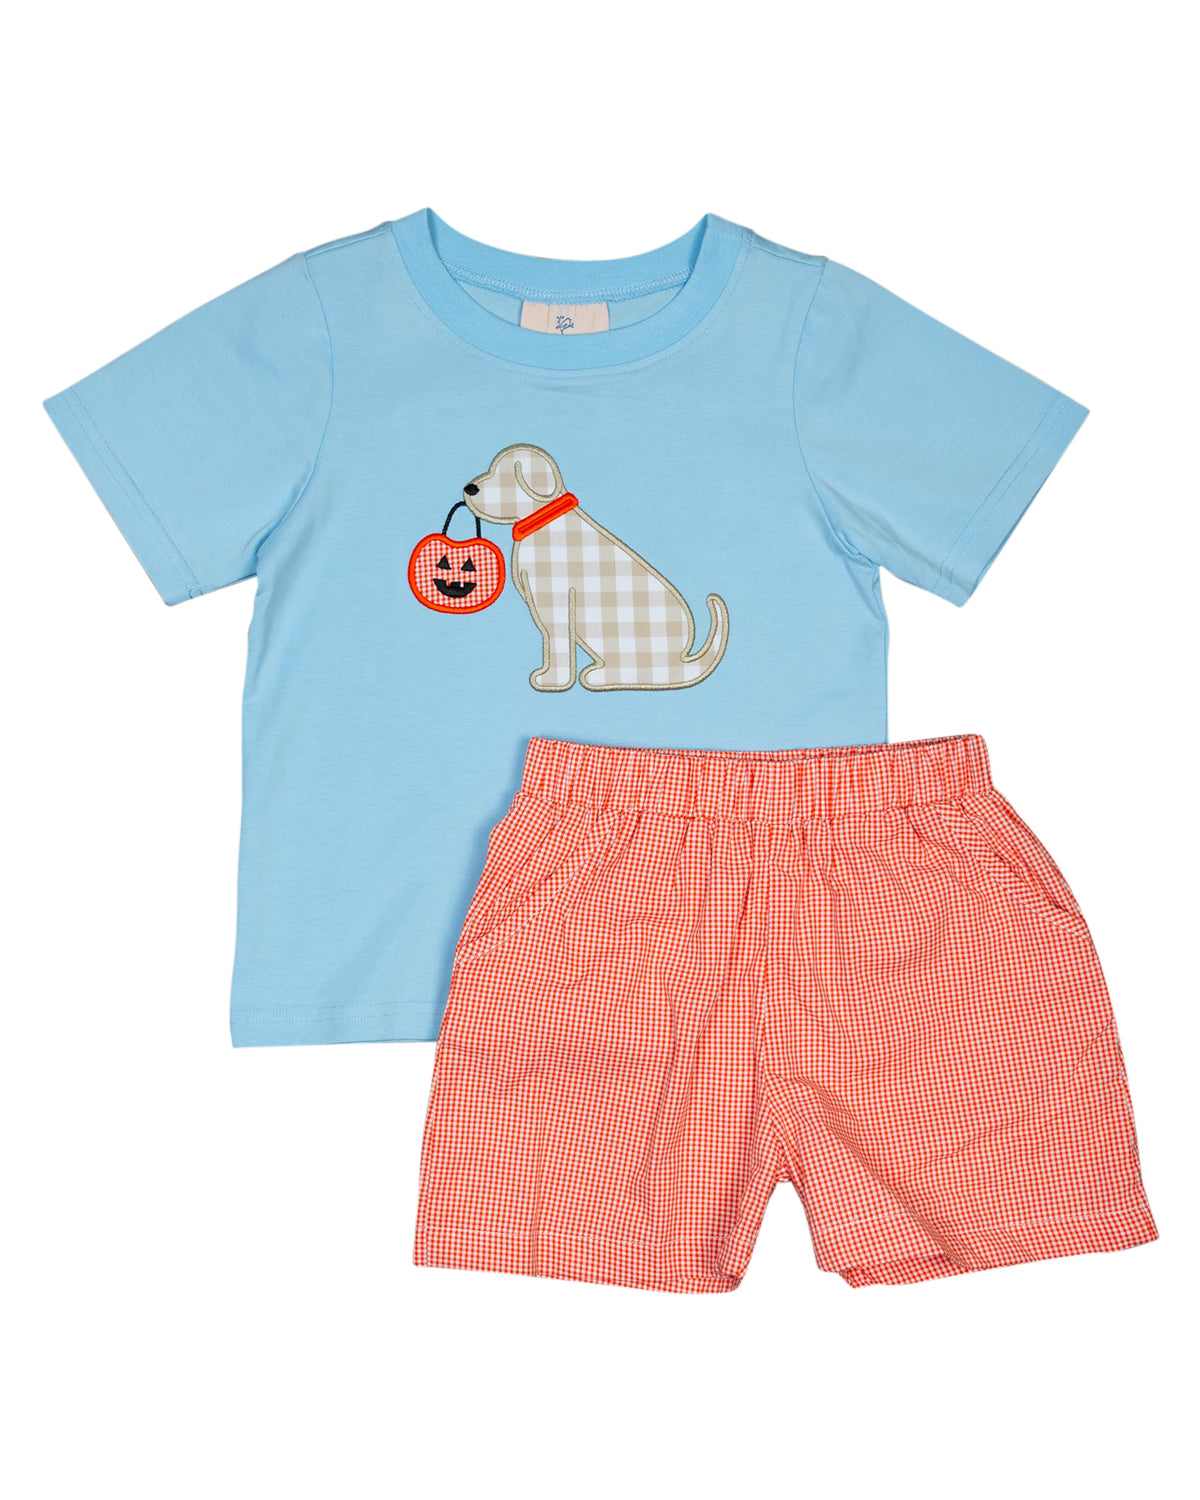 Trick or Treat Pup Shorts Set for Boy-FINAL SALE